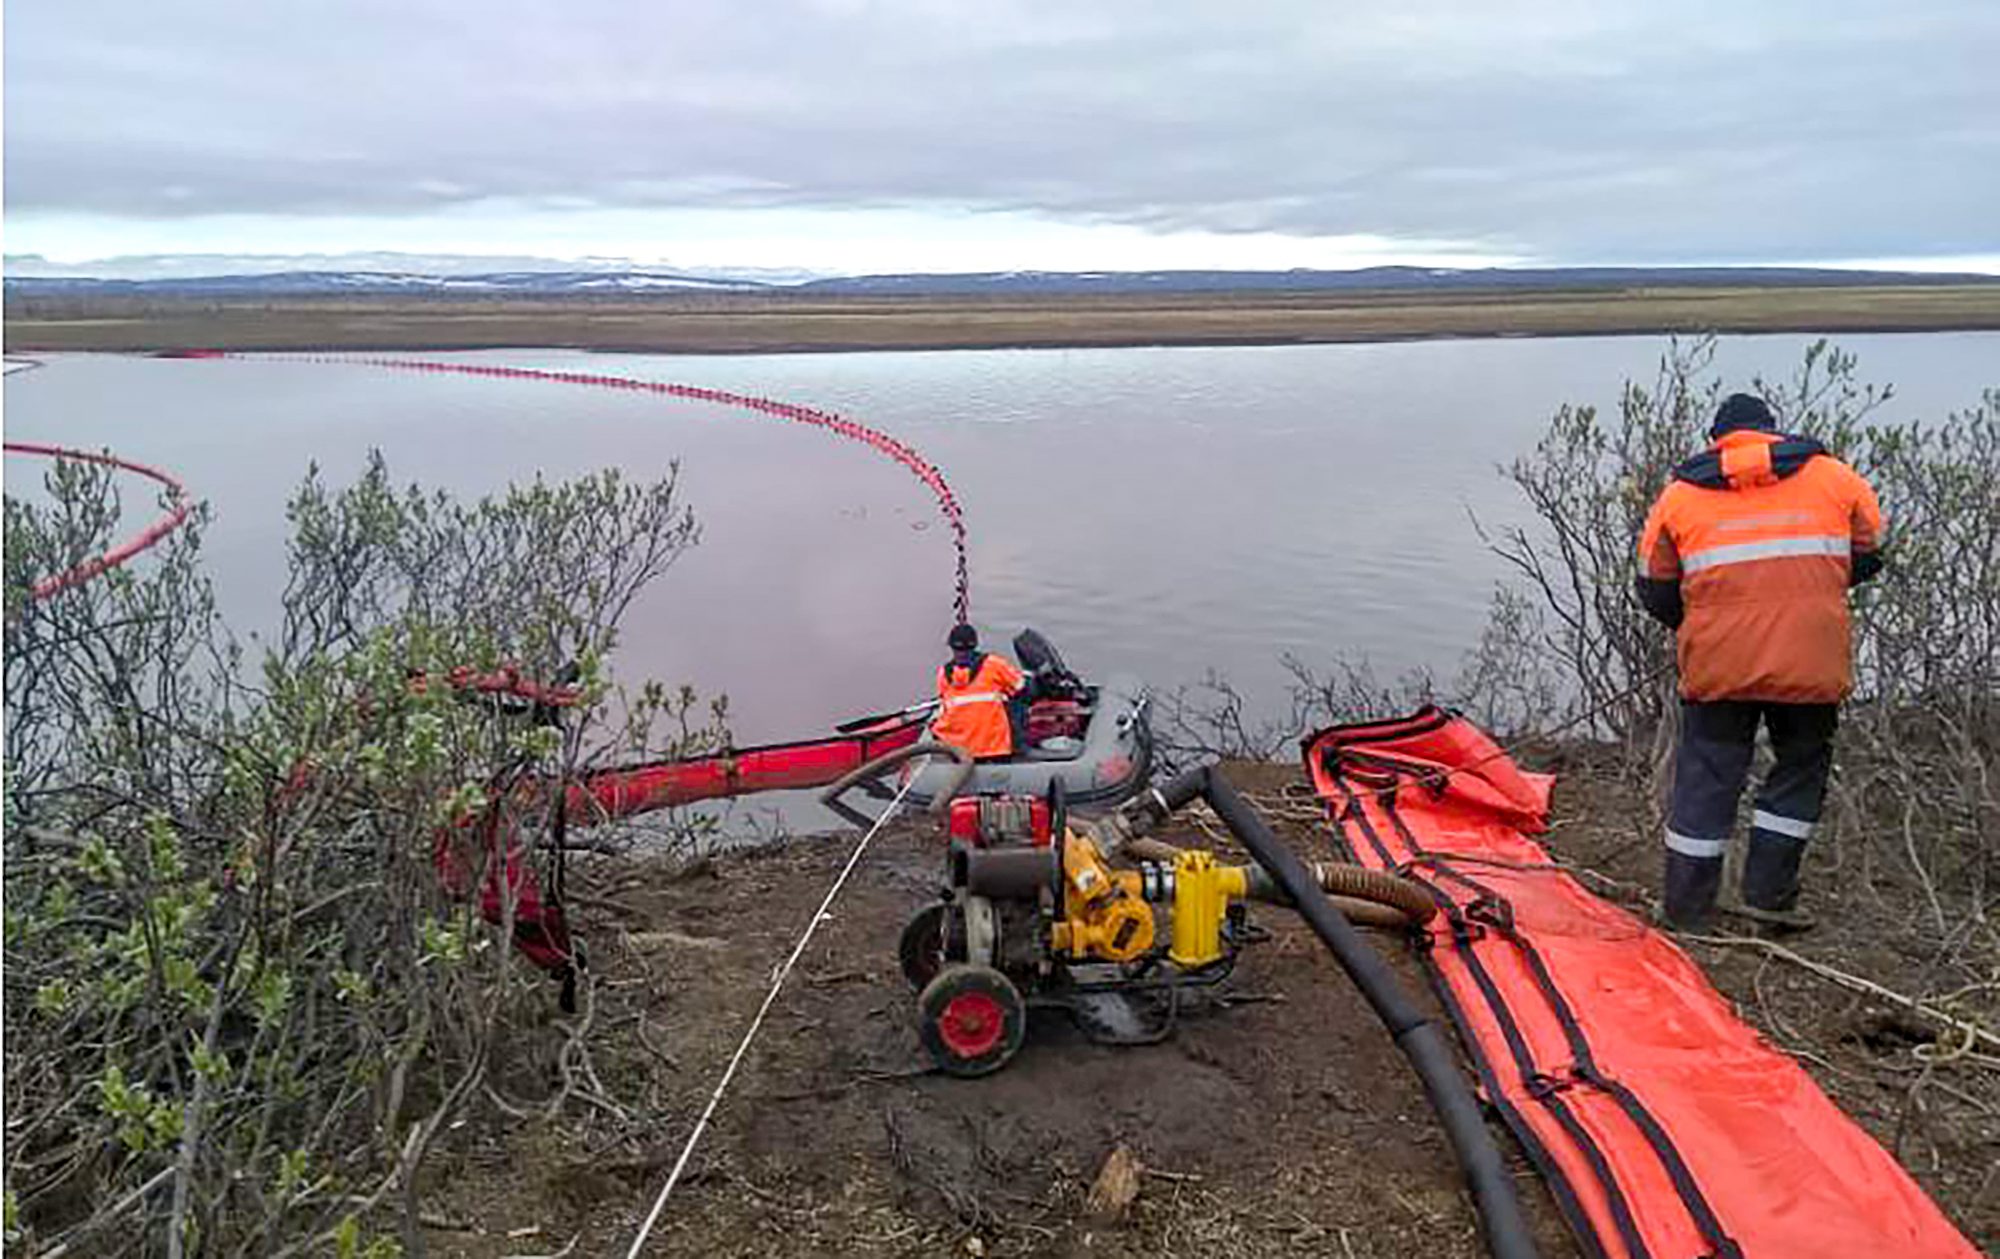 This handout photograph taken and released by the Marine Rescue Service of Russia on June 3, 2020, shows rescuers as they work near a large diesel spill in the Ambarnaya River outside Norilsk. - Russian President Vladimir Putin on June 3 ordered a state of emergency and criticised a subsidiary of metals giant Norilsk Nickel after a massive diesel spill into a Siberian river.
The spill of over 20,000 tonnes of diesel fuel took place on May 29, 2020. A fuel reservoir collapsed at a power plant near the city of Norilsk, located above the Arctic Circle, and leaked into a nearby river. (Photo by Yuri KADOBNOV / Marine Rescue Service / AFP) / RESTRICTED TO EDITORIAL USE - MANDATORY CREDIT 